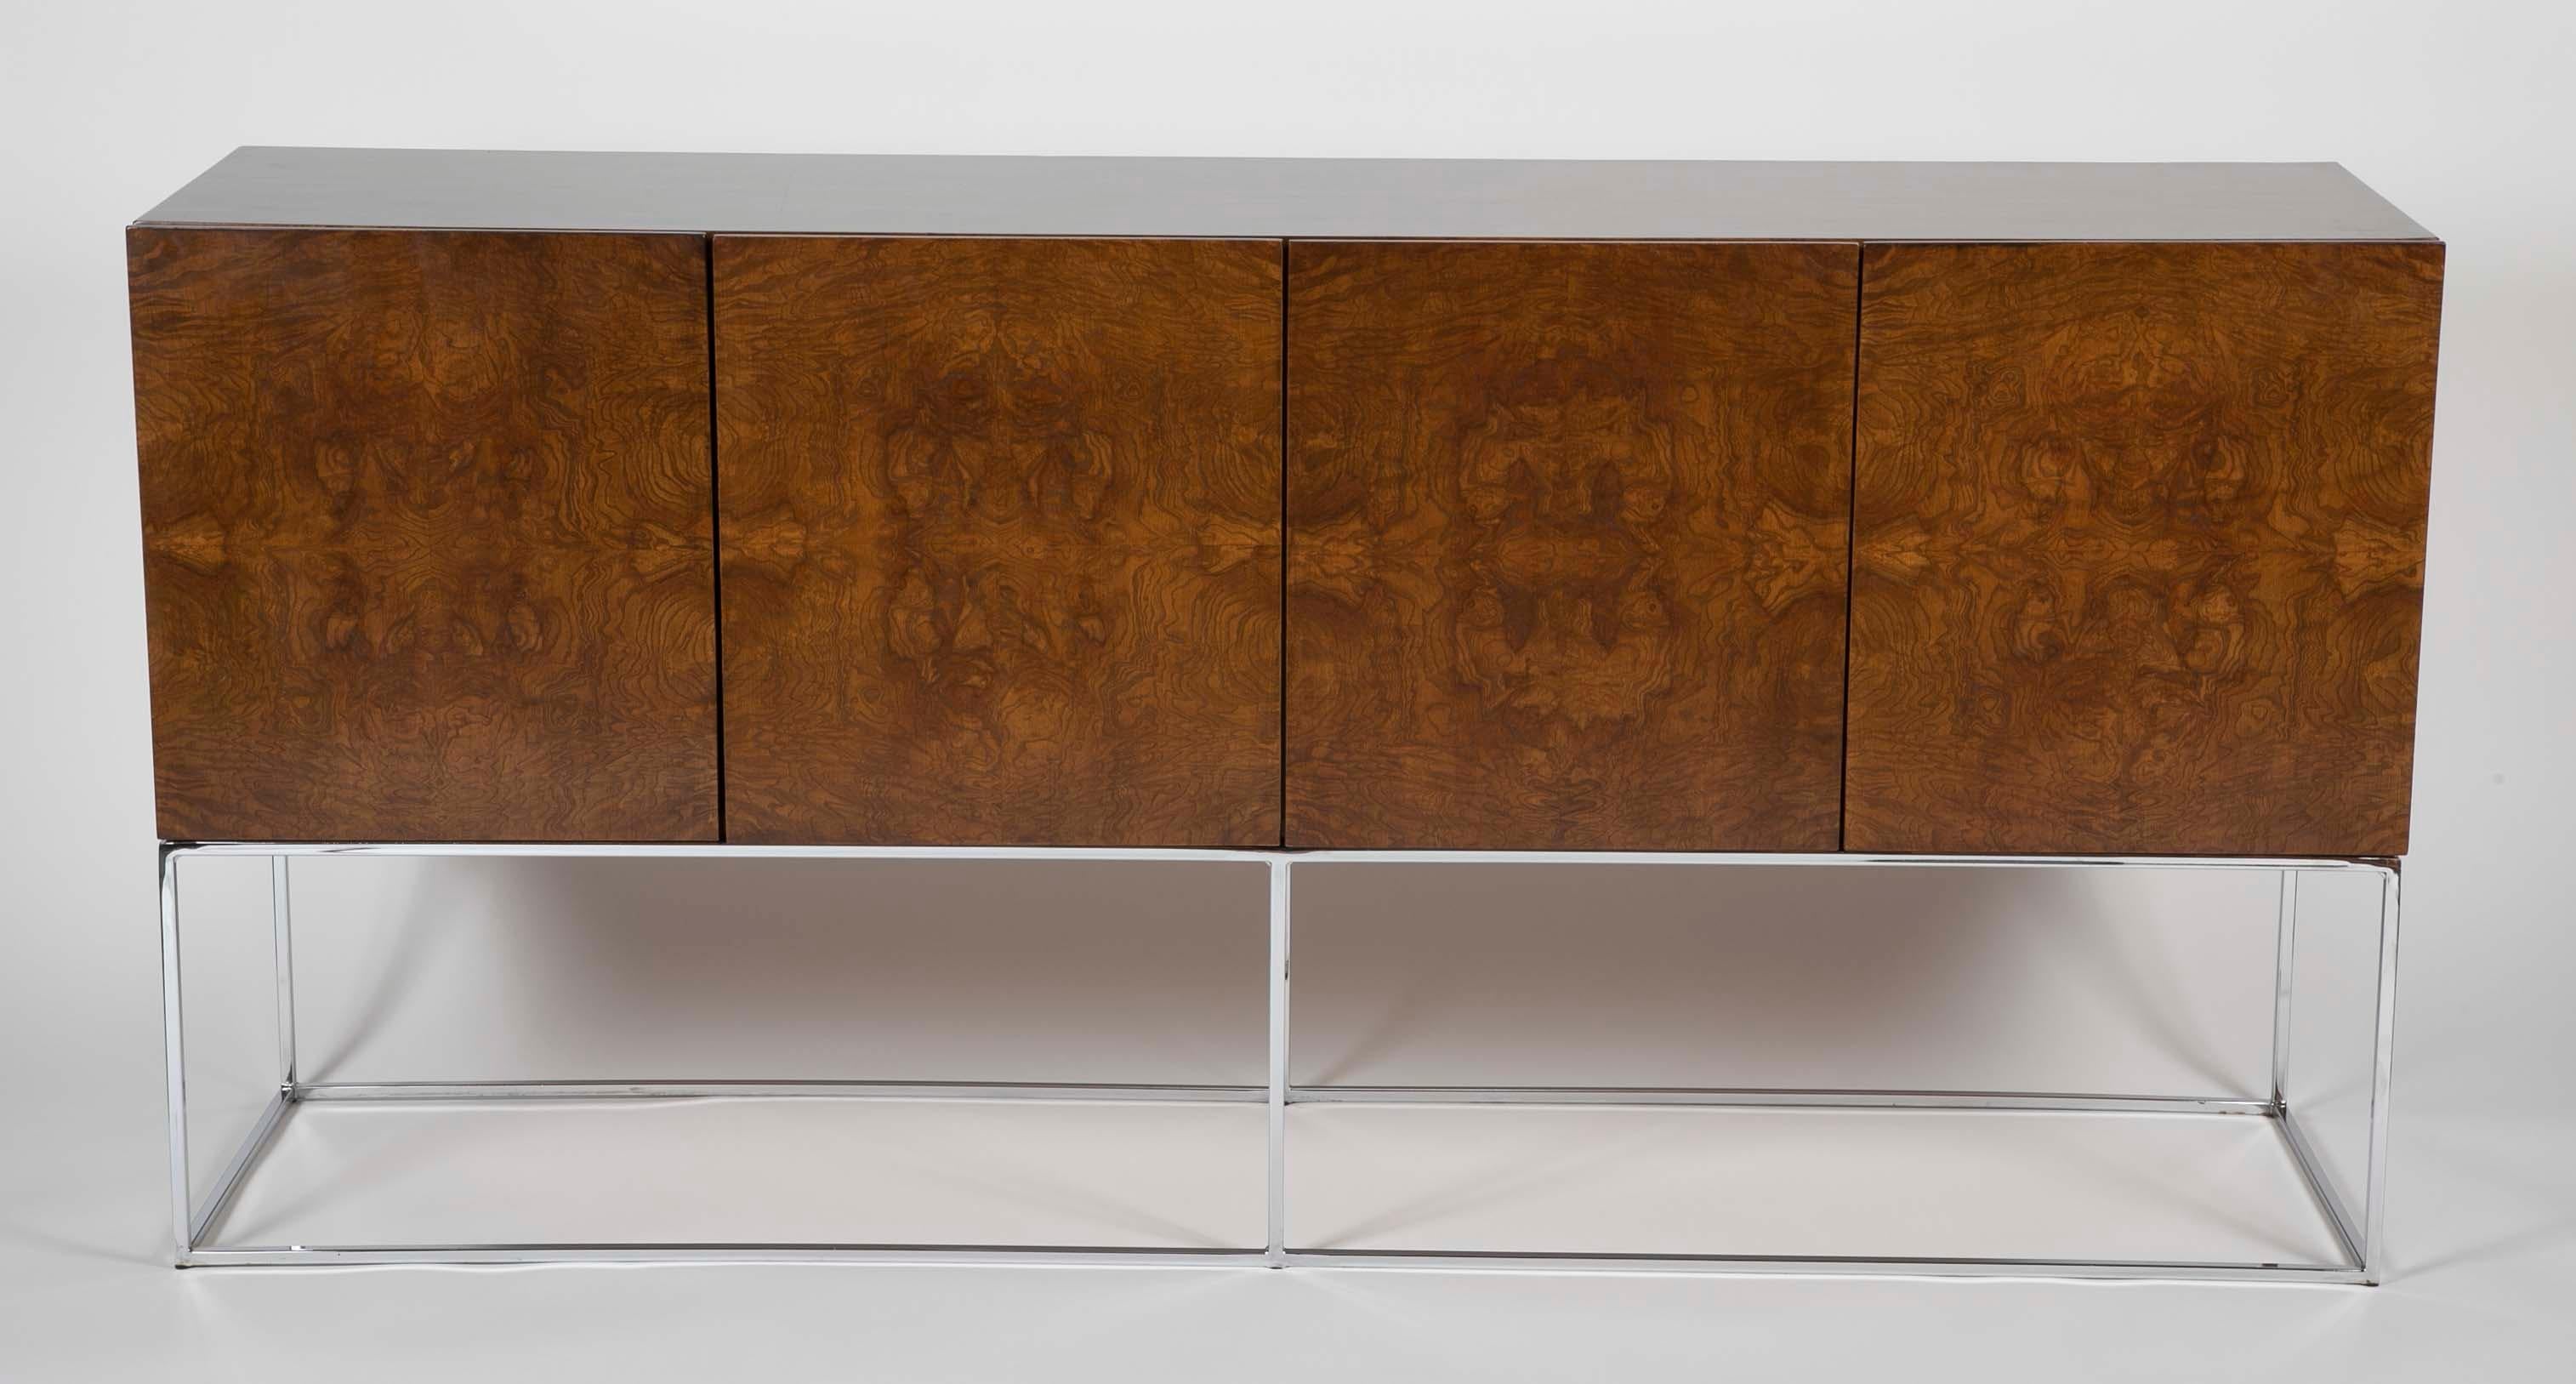 A four door midentury burled wood sideboard on chrome base by Milo Baughman.